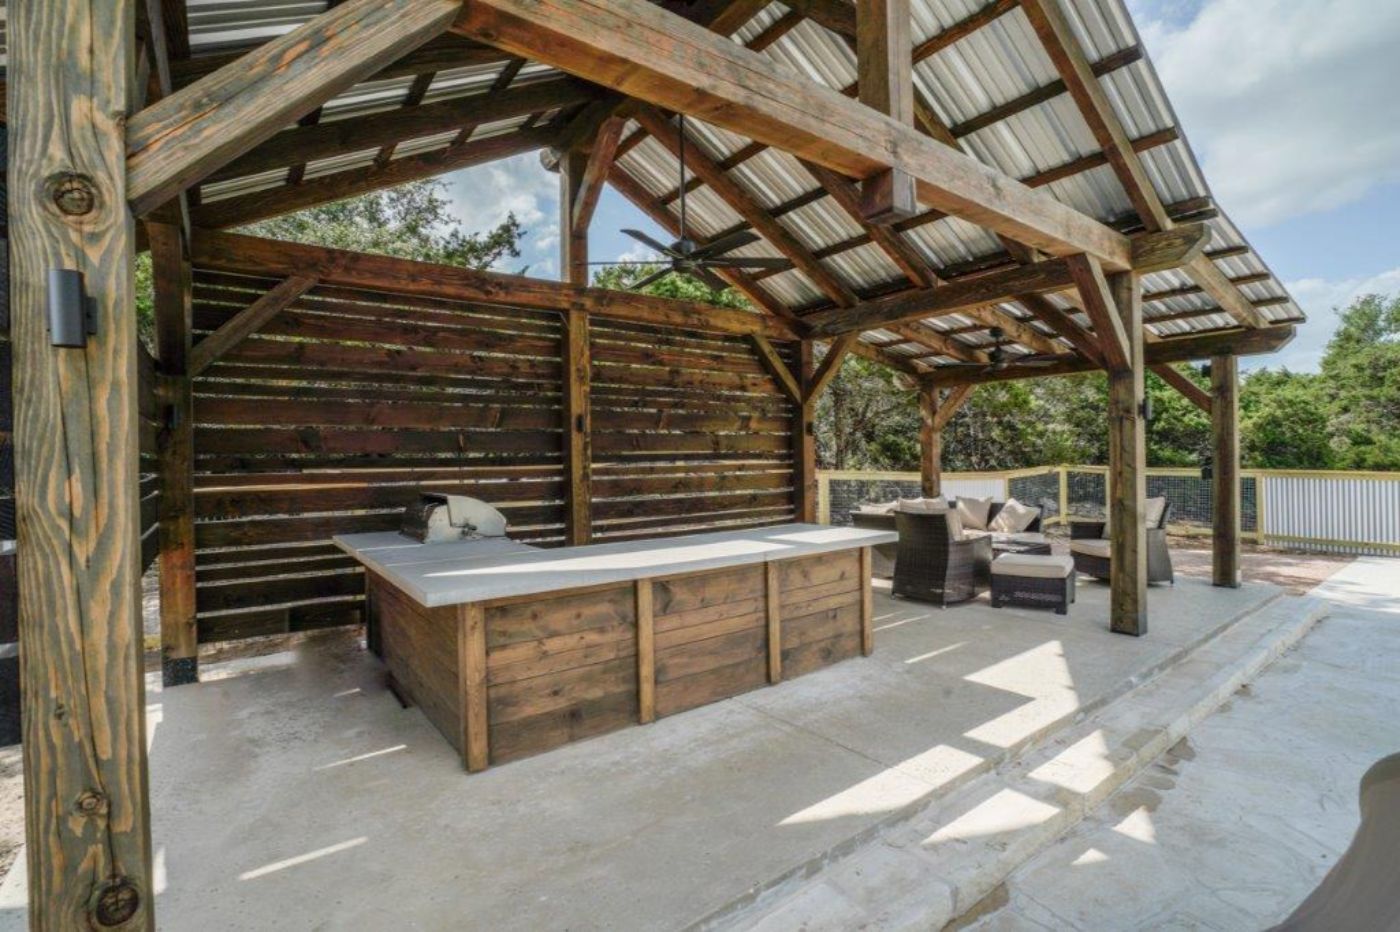 35x15, Austin, Outdoor Kitchen or kitchen, Standing seam metal roof or R Panel Metal Roof, Pavilion with Lean-To, Heavy Timbers, Outdoor Living, Patio Furniture, Poolside or Swimming pool, back wall, side wall, Pool House, Cabana, Free Standing Pavilion